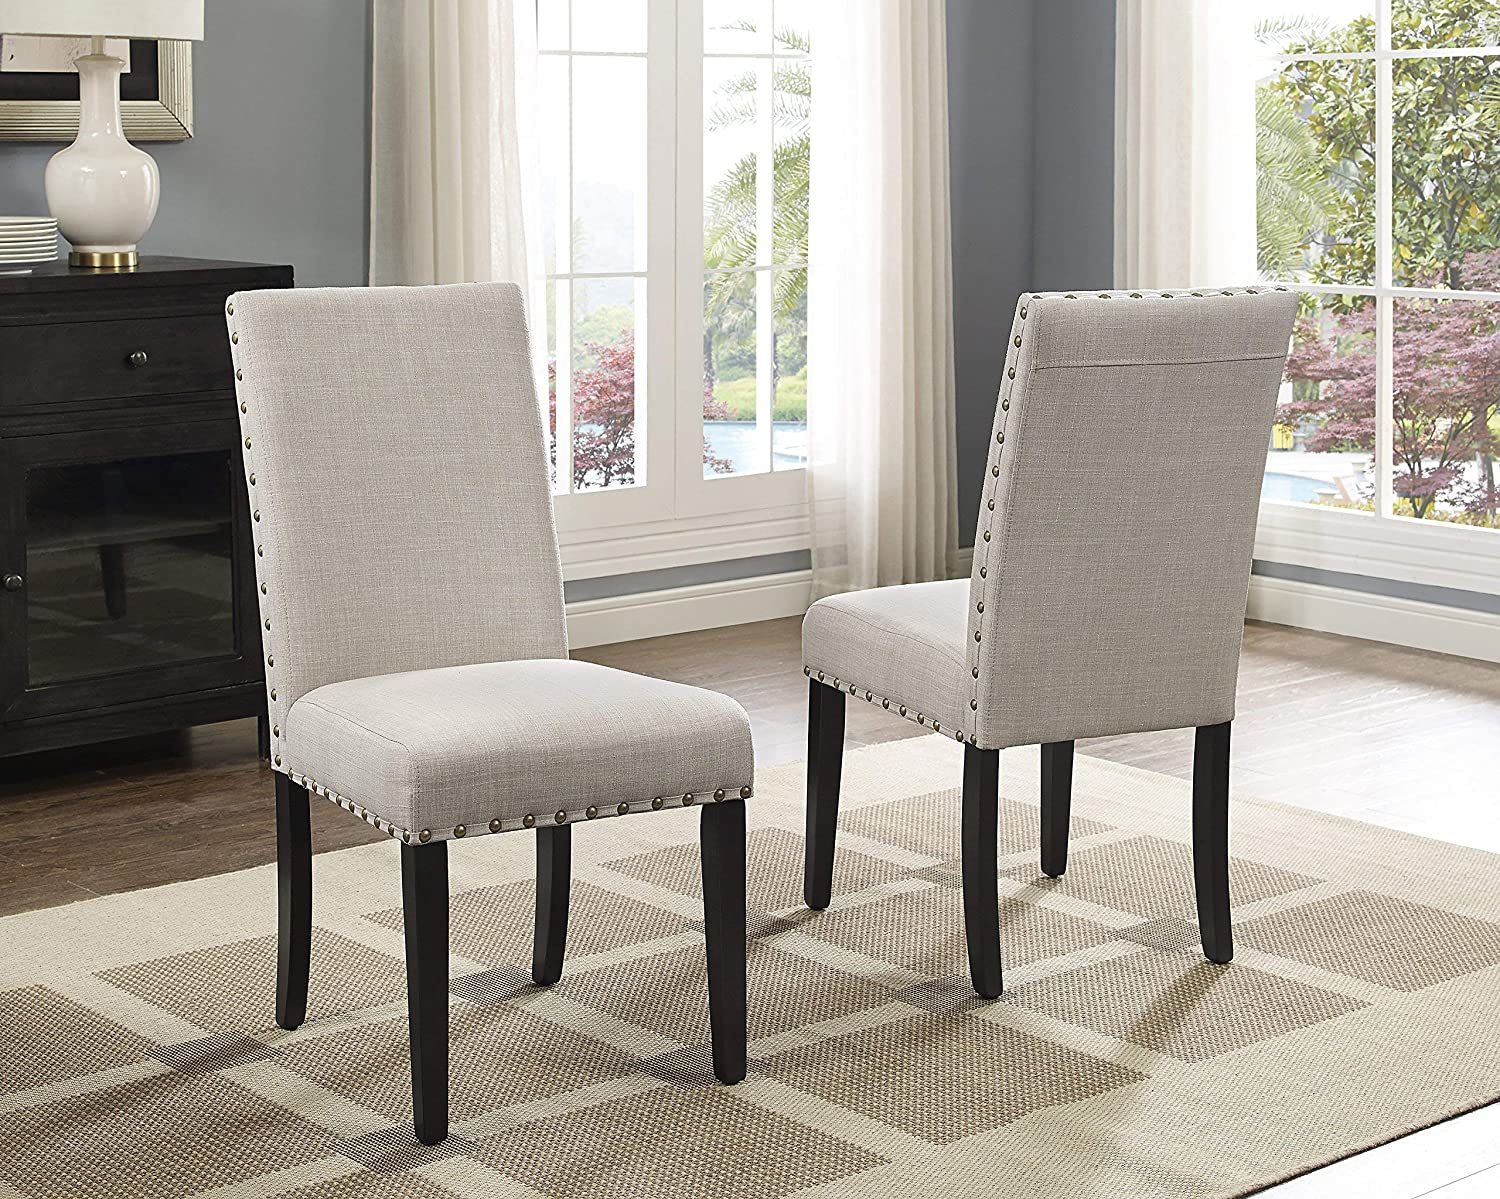 Primary image for Biony Tan Fabric Dining Chairs With Nailhead Trim, Set Of 2, By Roundhill